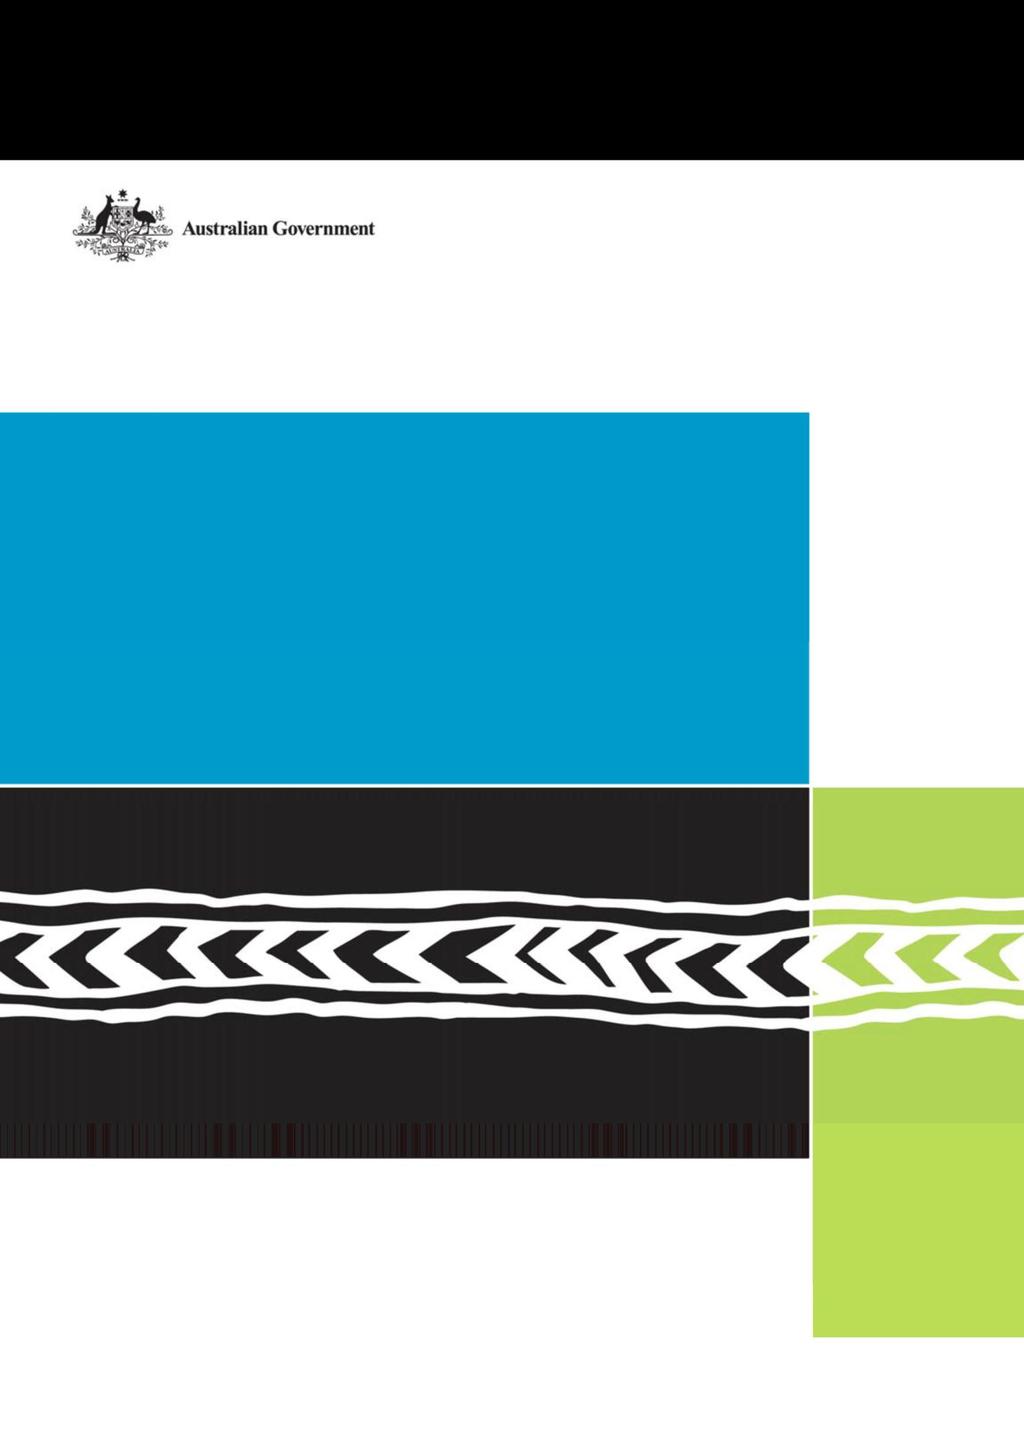 Review of Higher Education Access and Outcomes for Aboriginal and Torres Strait Islander People Final Report